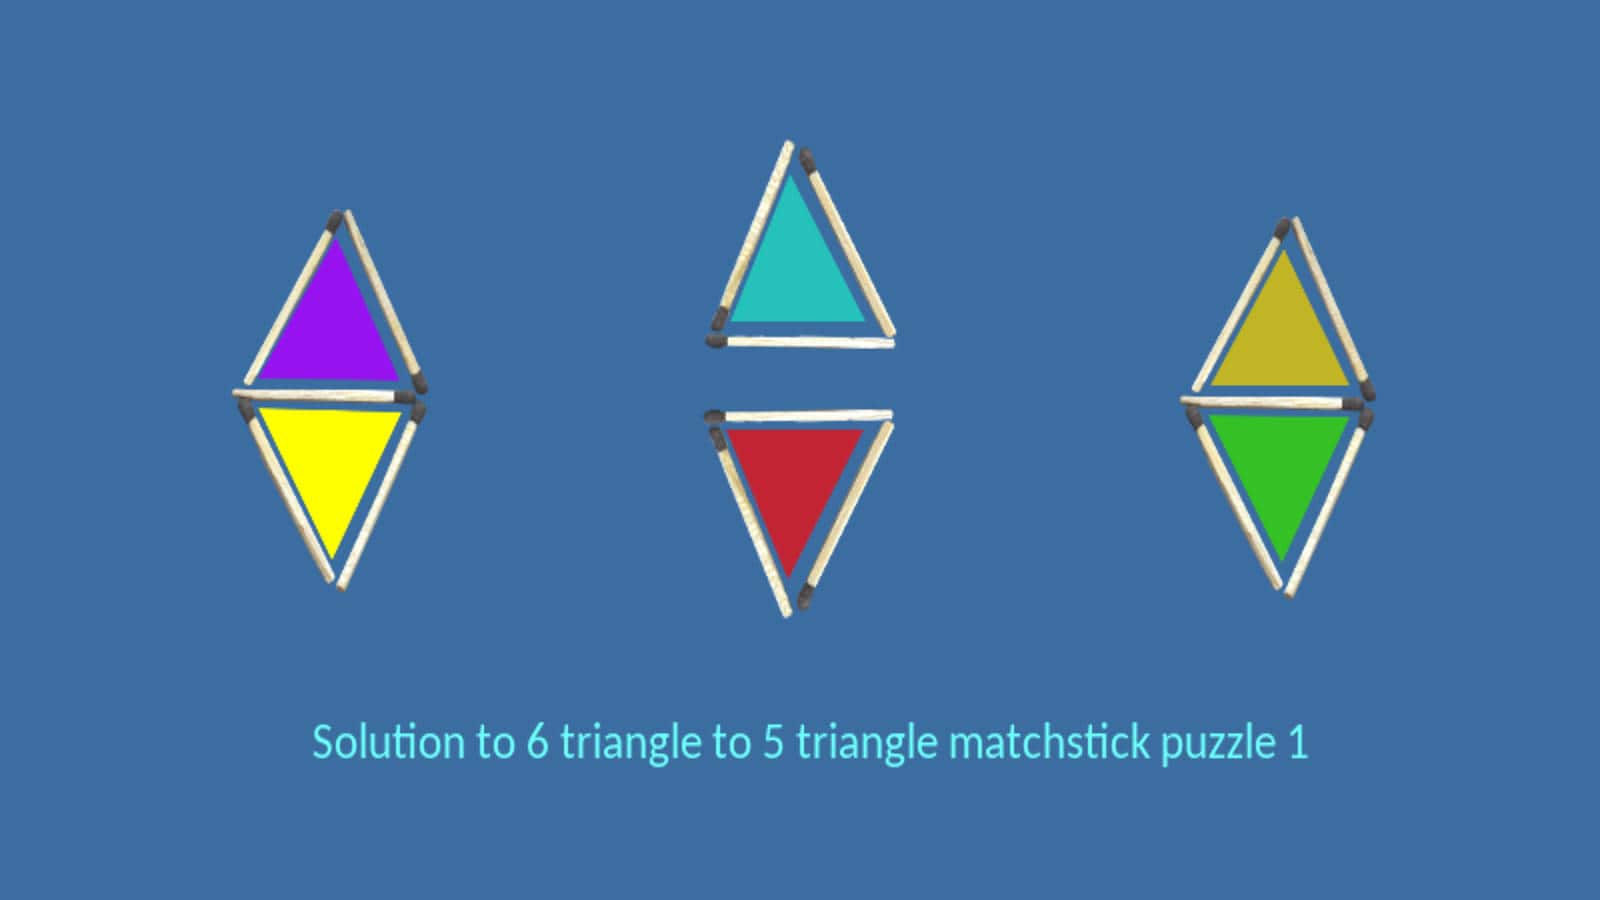 6 triangles matchstick puzzle: move 2 matches to make 5 triangles